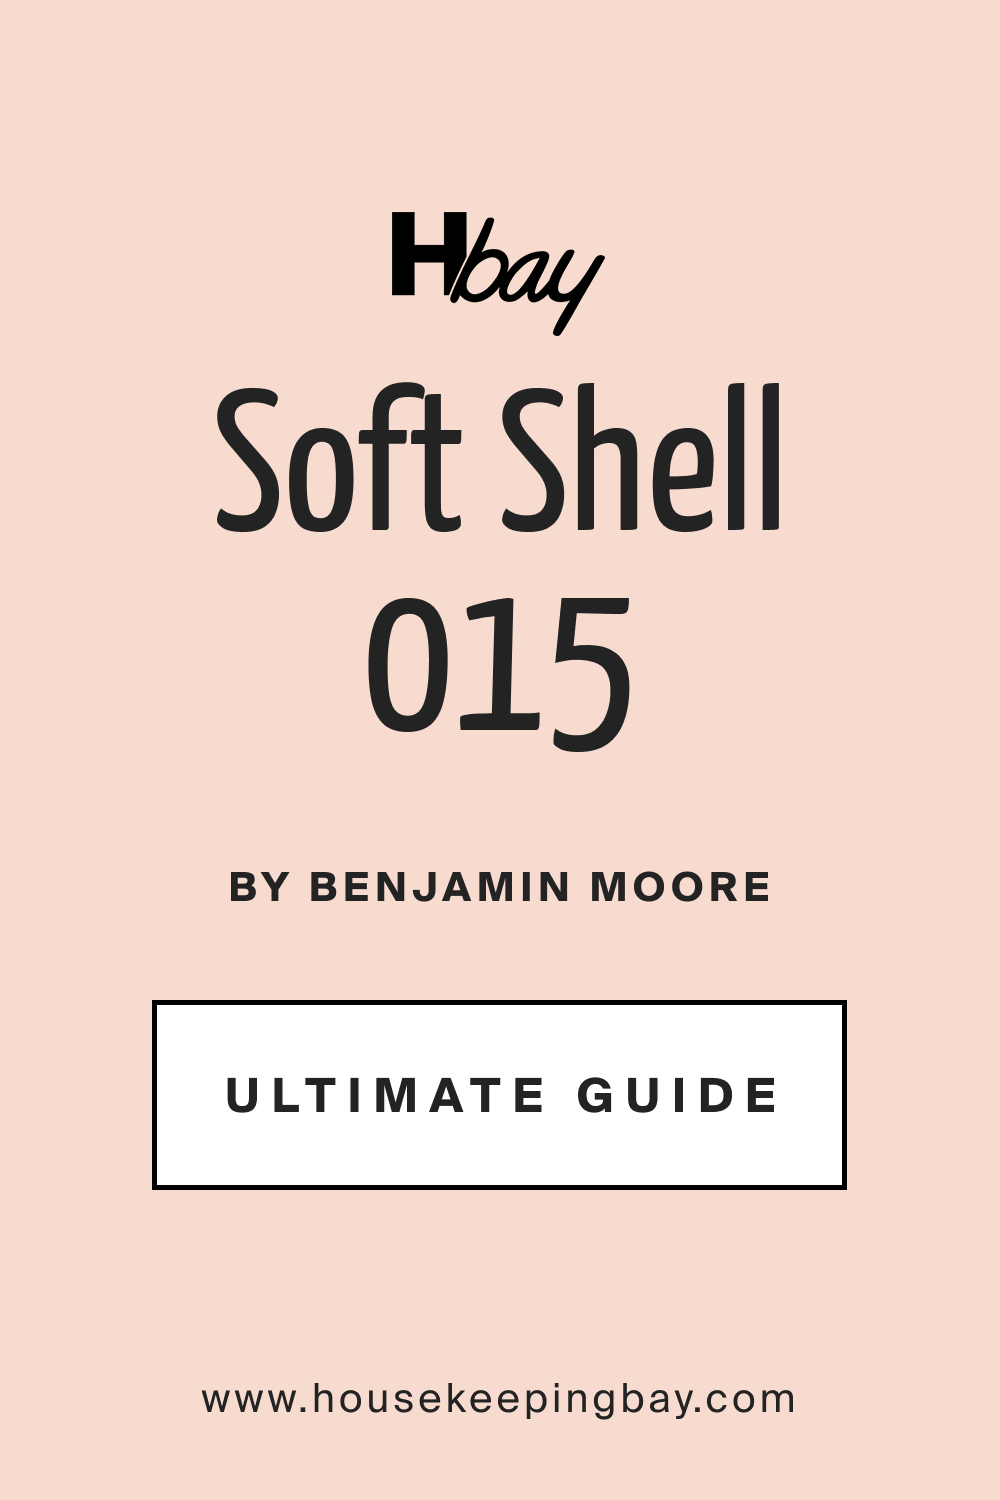 Soft Shell 015 by Benjamin Moore Ultimate Guide